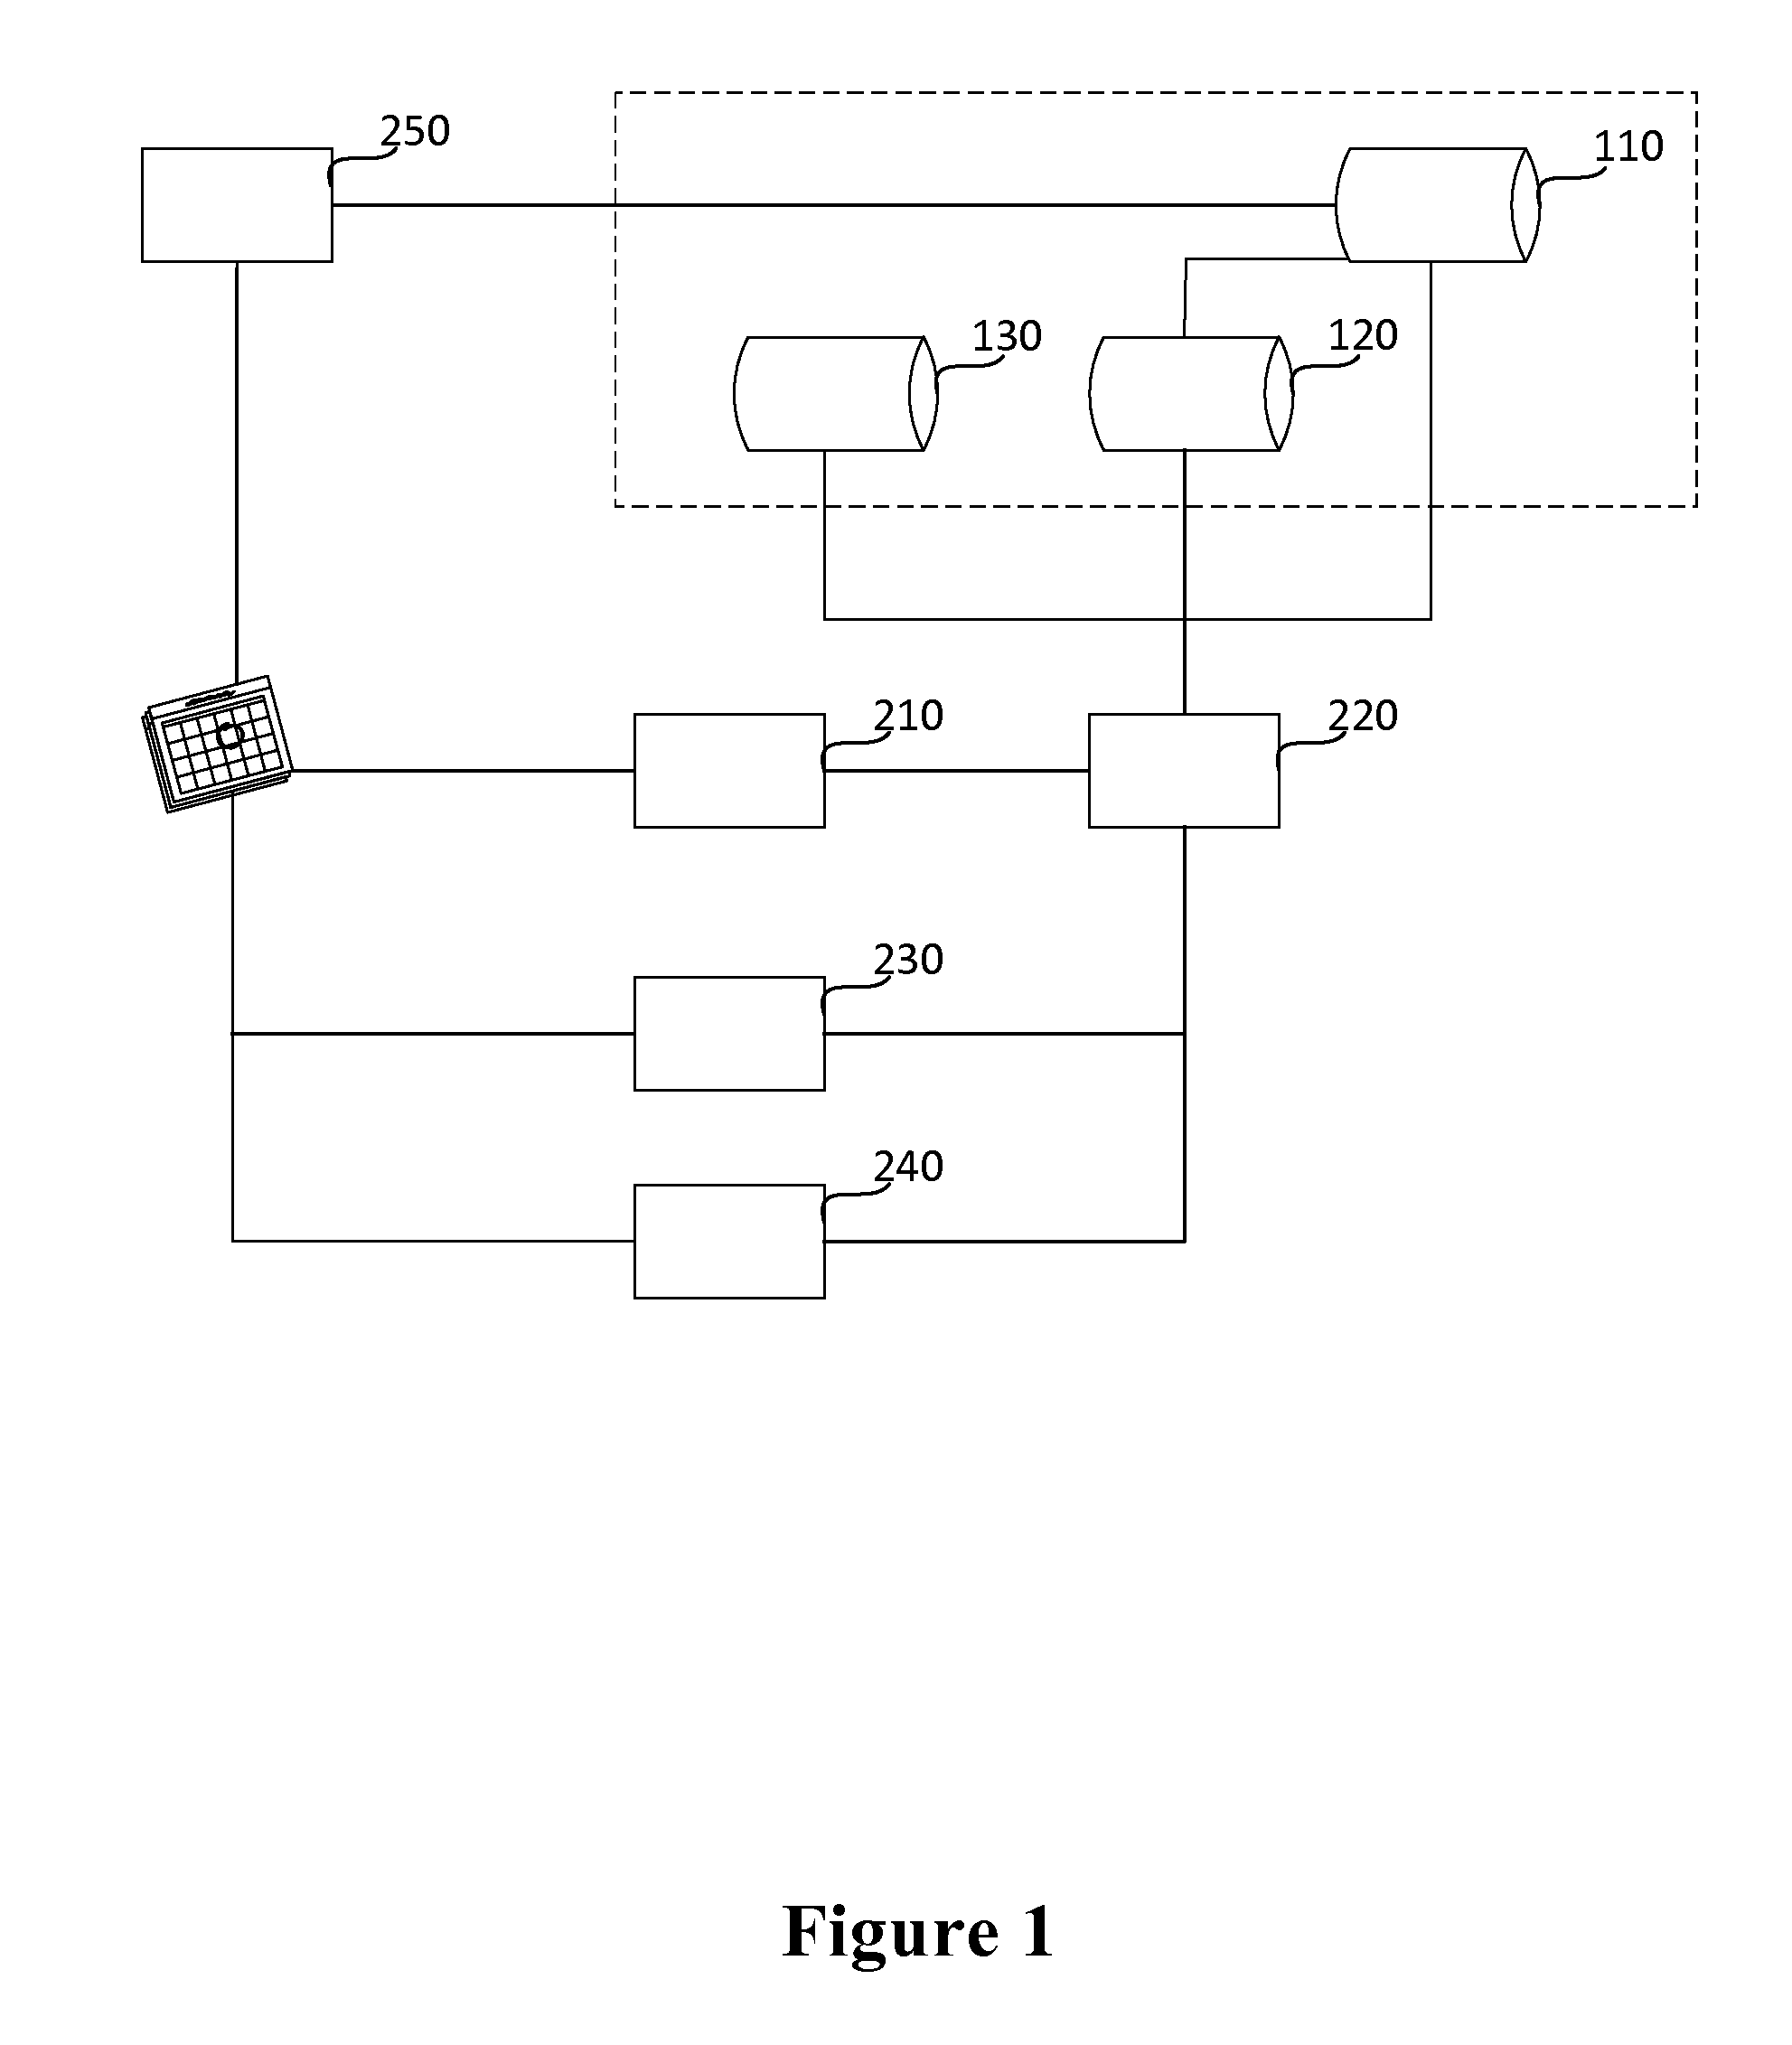 System and Method for Intelligent Call Blocking with Block Mode